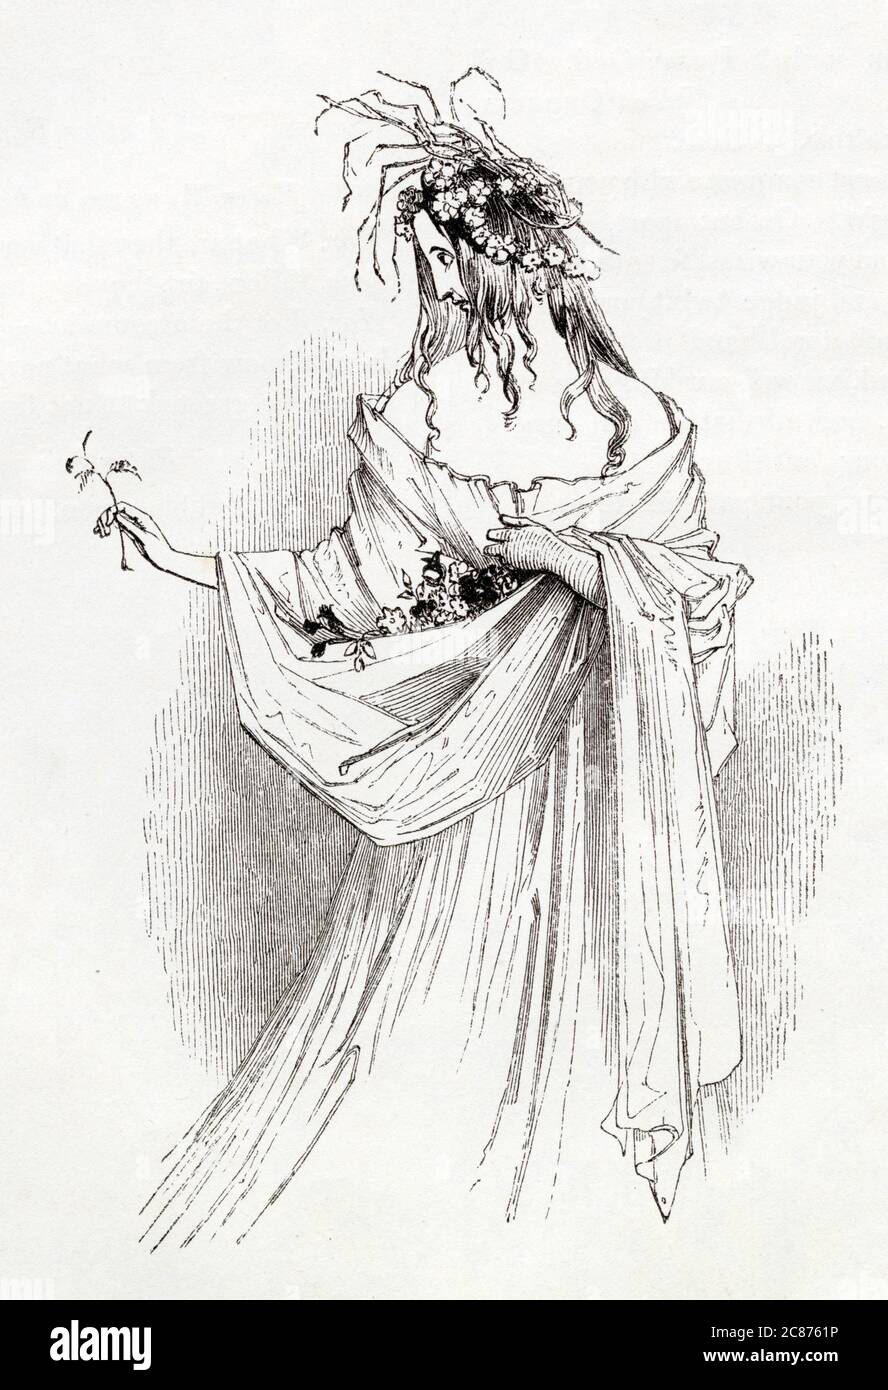 Illustration by Kenny Meadows to Hamlet, Prince of Denmark, by William Shakespeare. Ophelia with flowers and straws, having gone mad with grief following the death of her father Polonius.      Date: 1840 Stock Photo